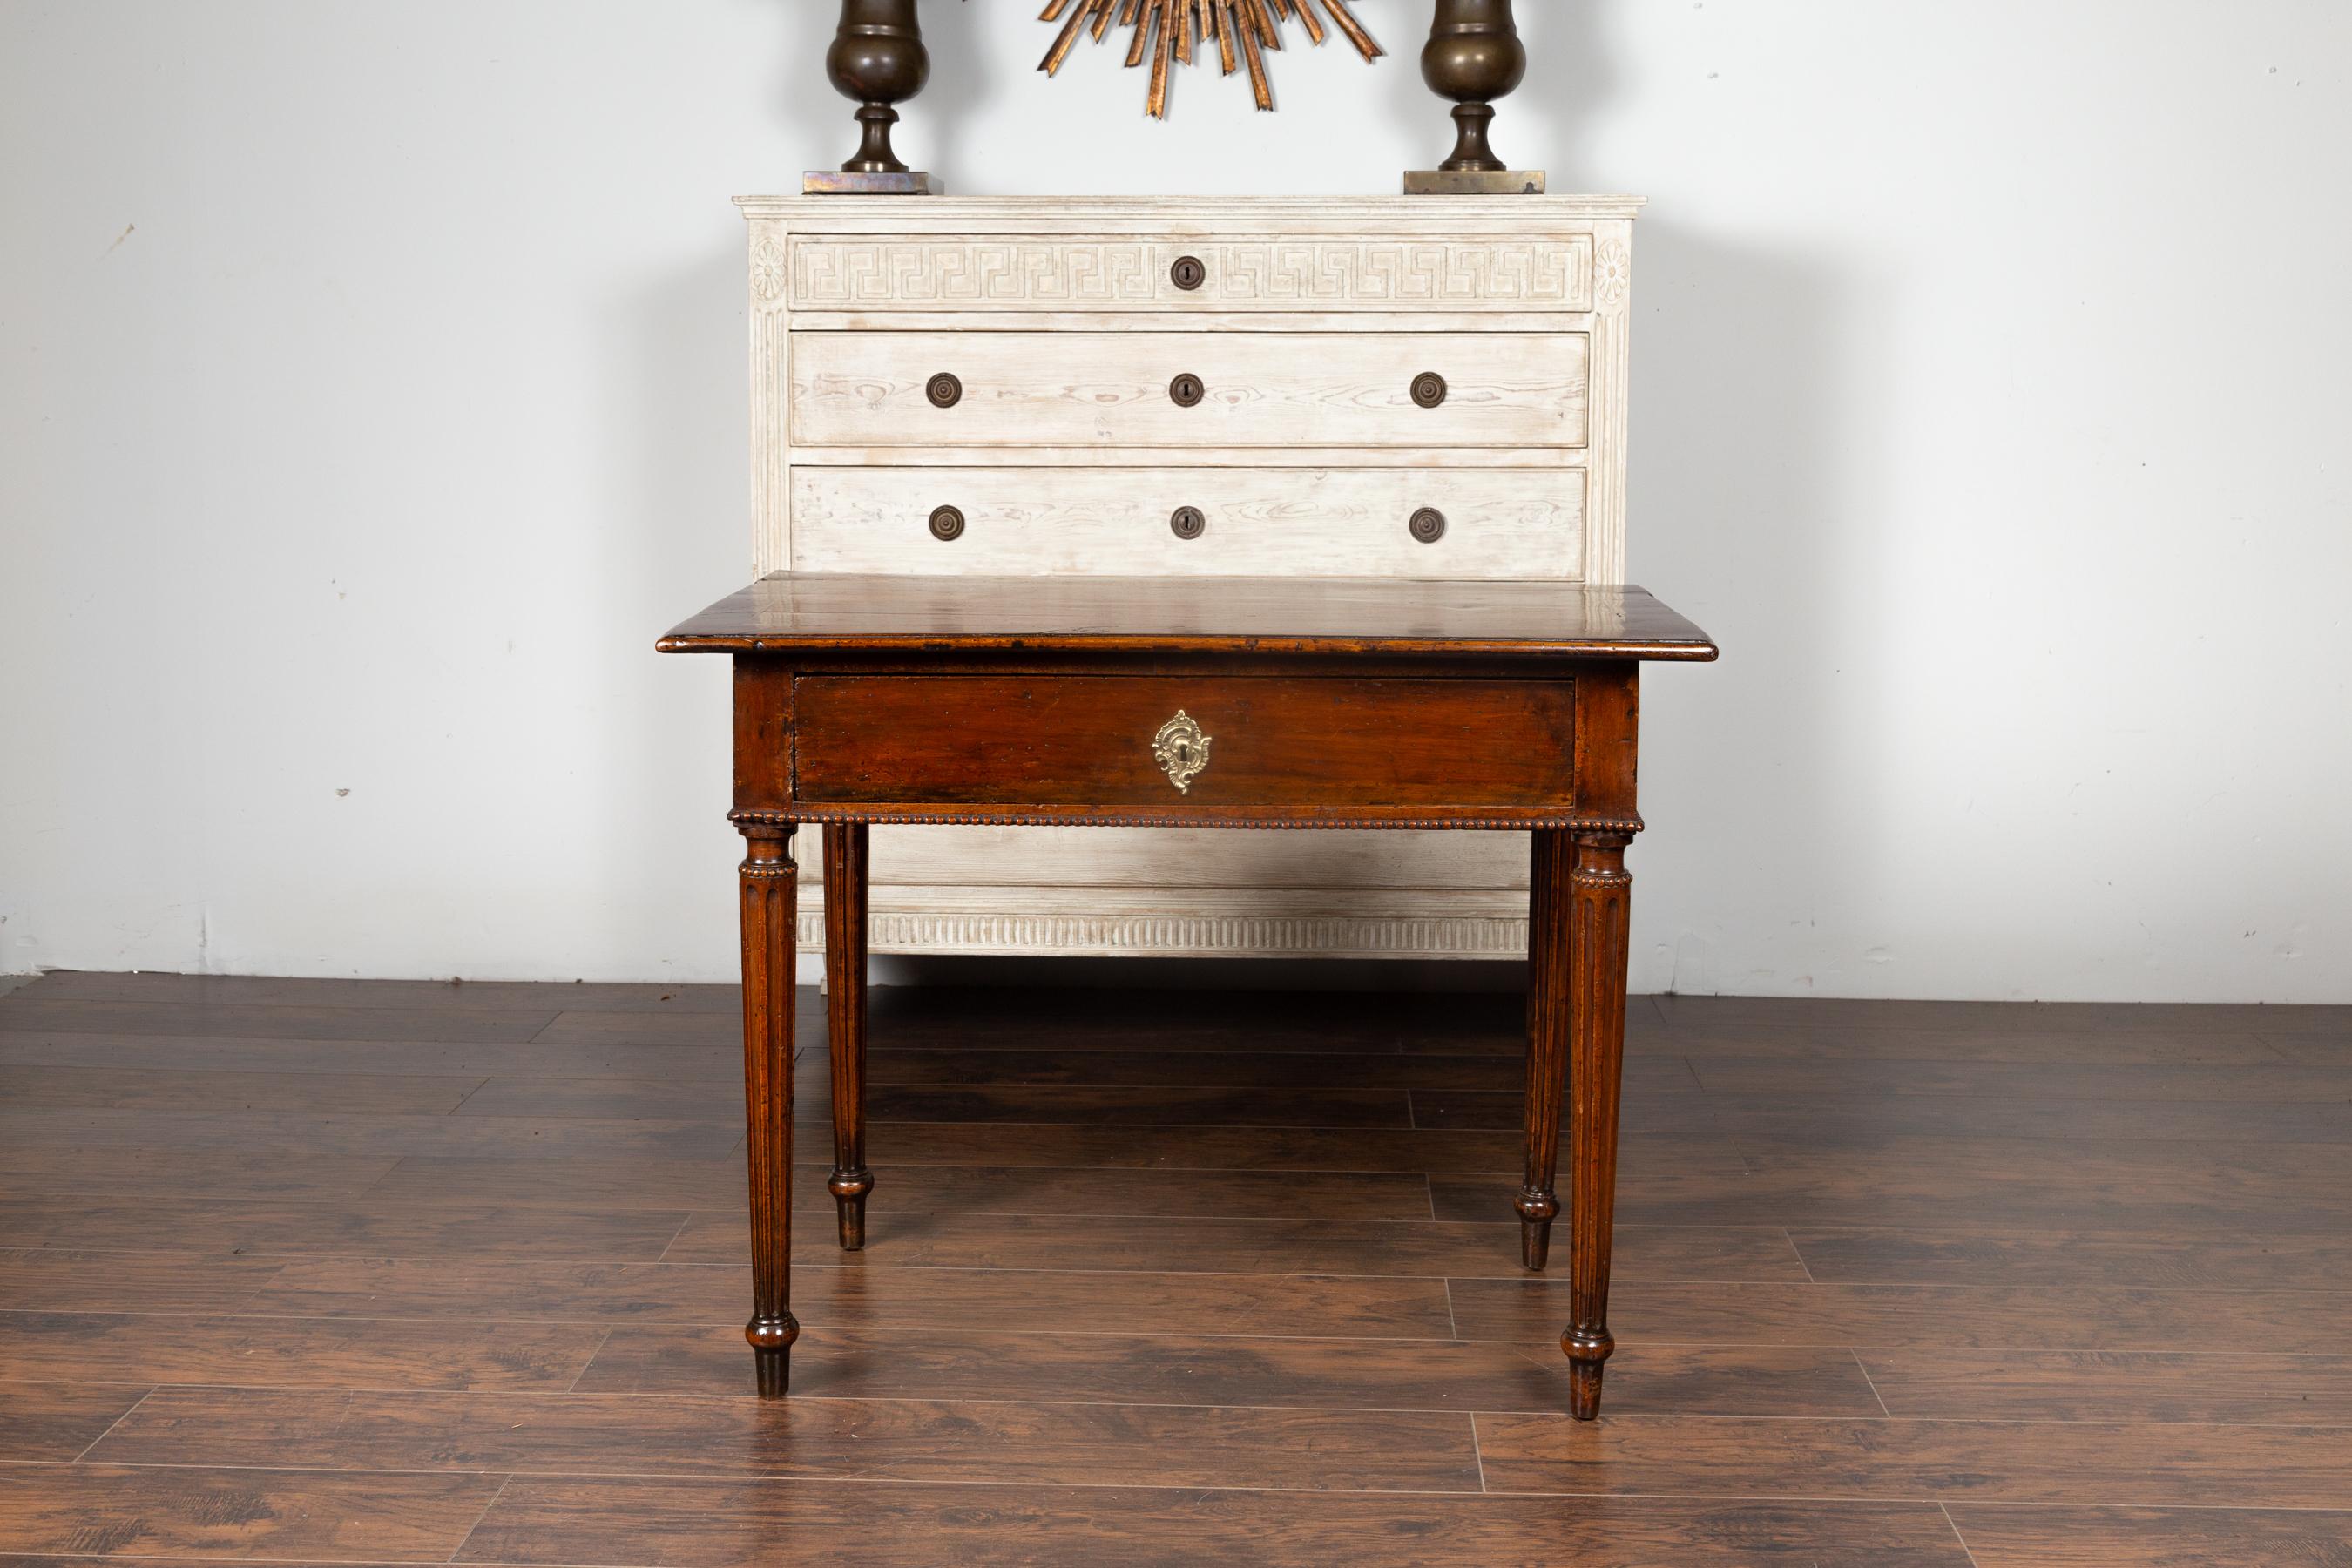 19th Century French Neoclassical Walnut Side Table with Banding, Fluted Legs and Drawer